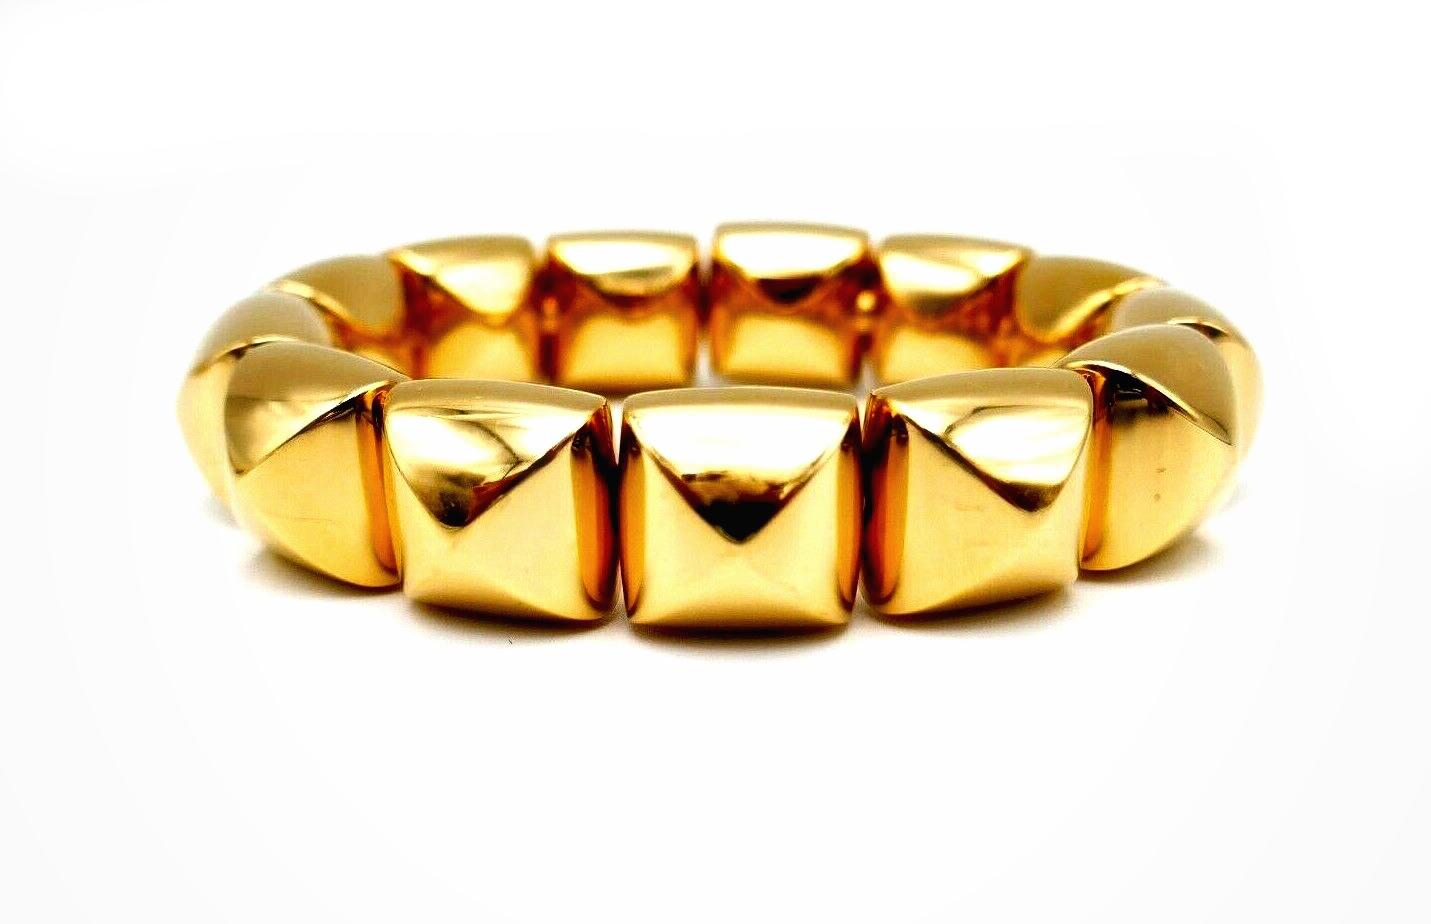 Open bracelet comprised of polished yellow gold pyramids, slip-on style. From Freccia collection by Vhernier. Stamped with Vhernier maker's mark, a hallmark for 18k gold and a serial number.
Measurements: length is 5